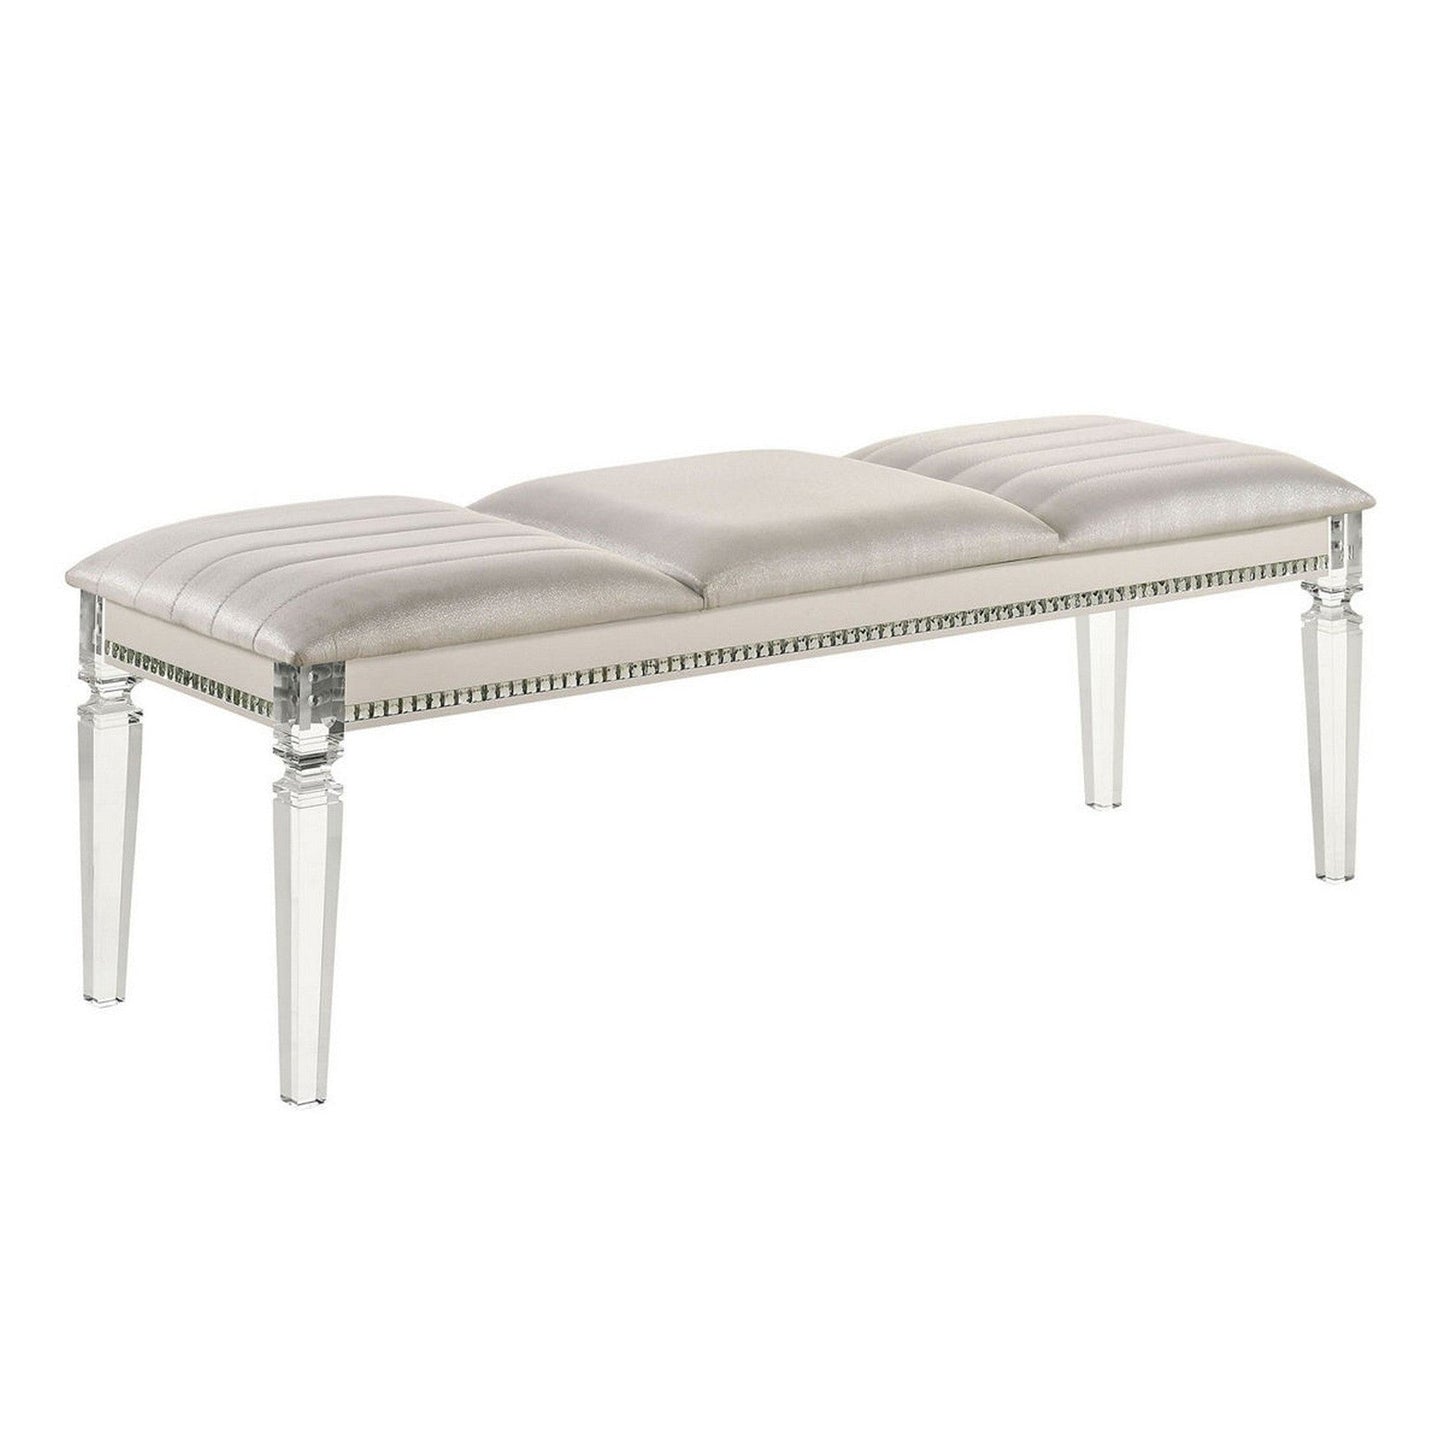 Benzara White Tufted Leatherette Seater Wooden Bench With Mirror Accents